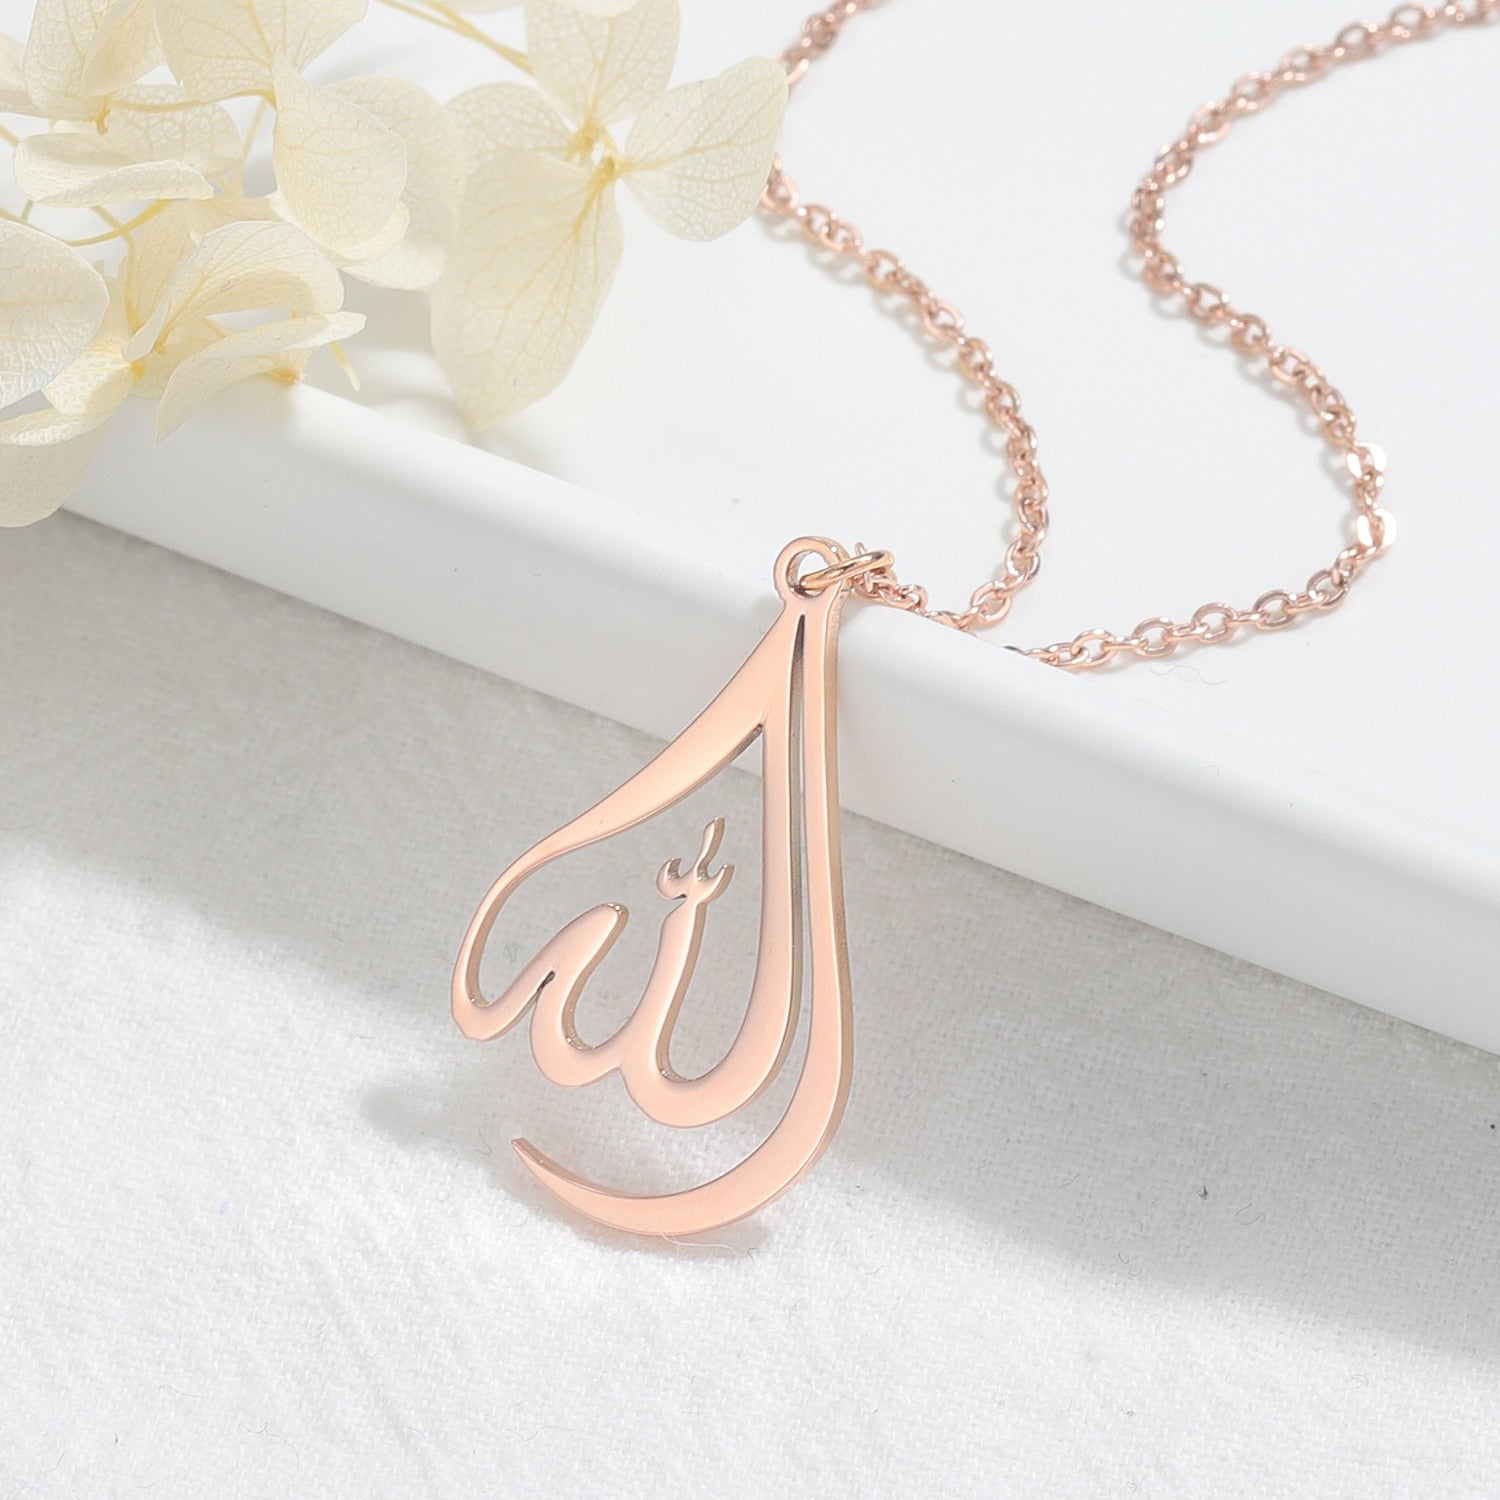 1 Gram Gold Allah Pendant Islamic Word With Chain Shop Online SMDR846